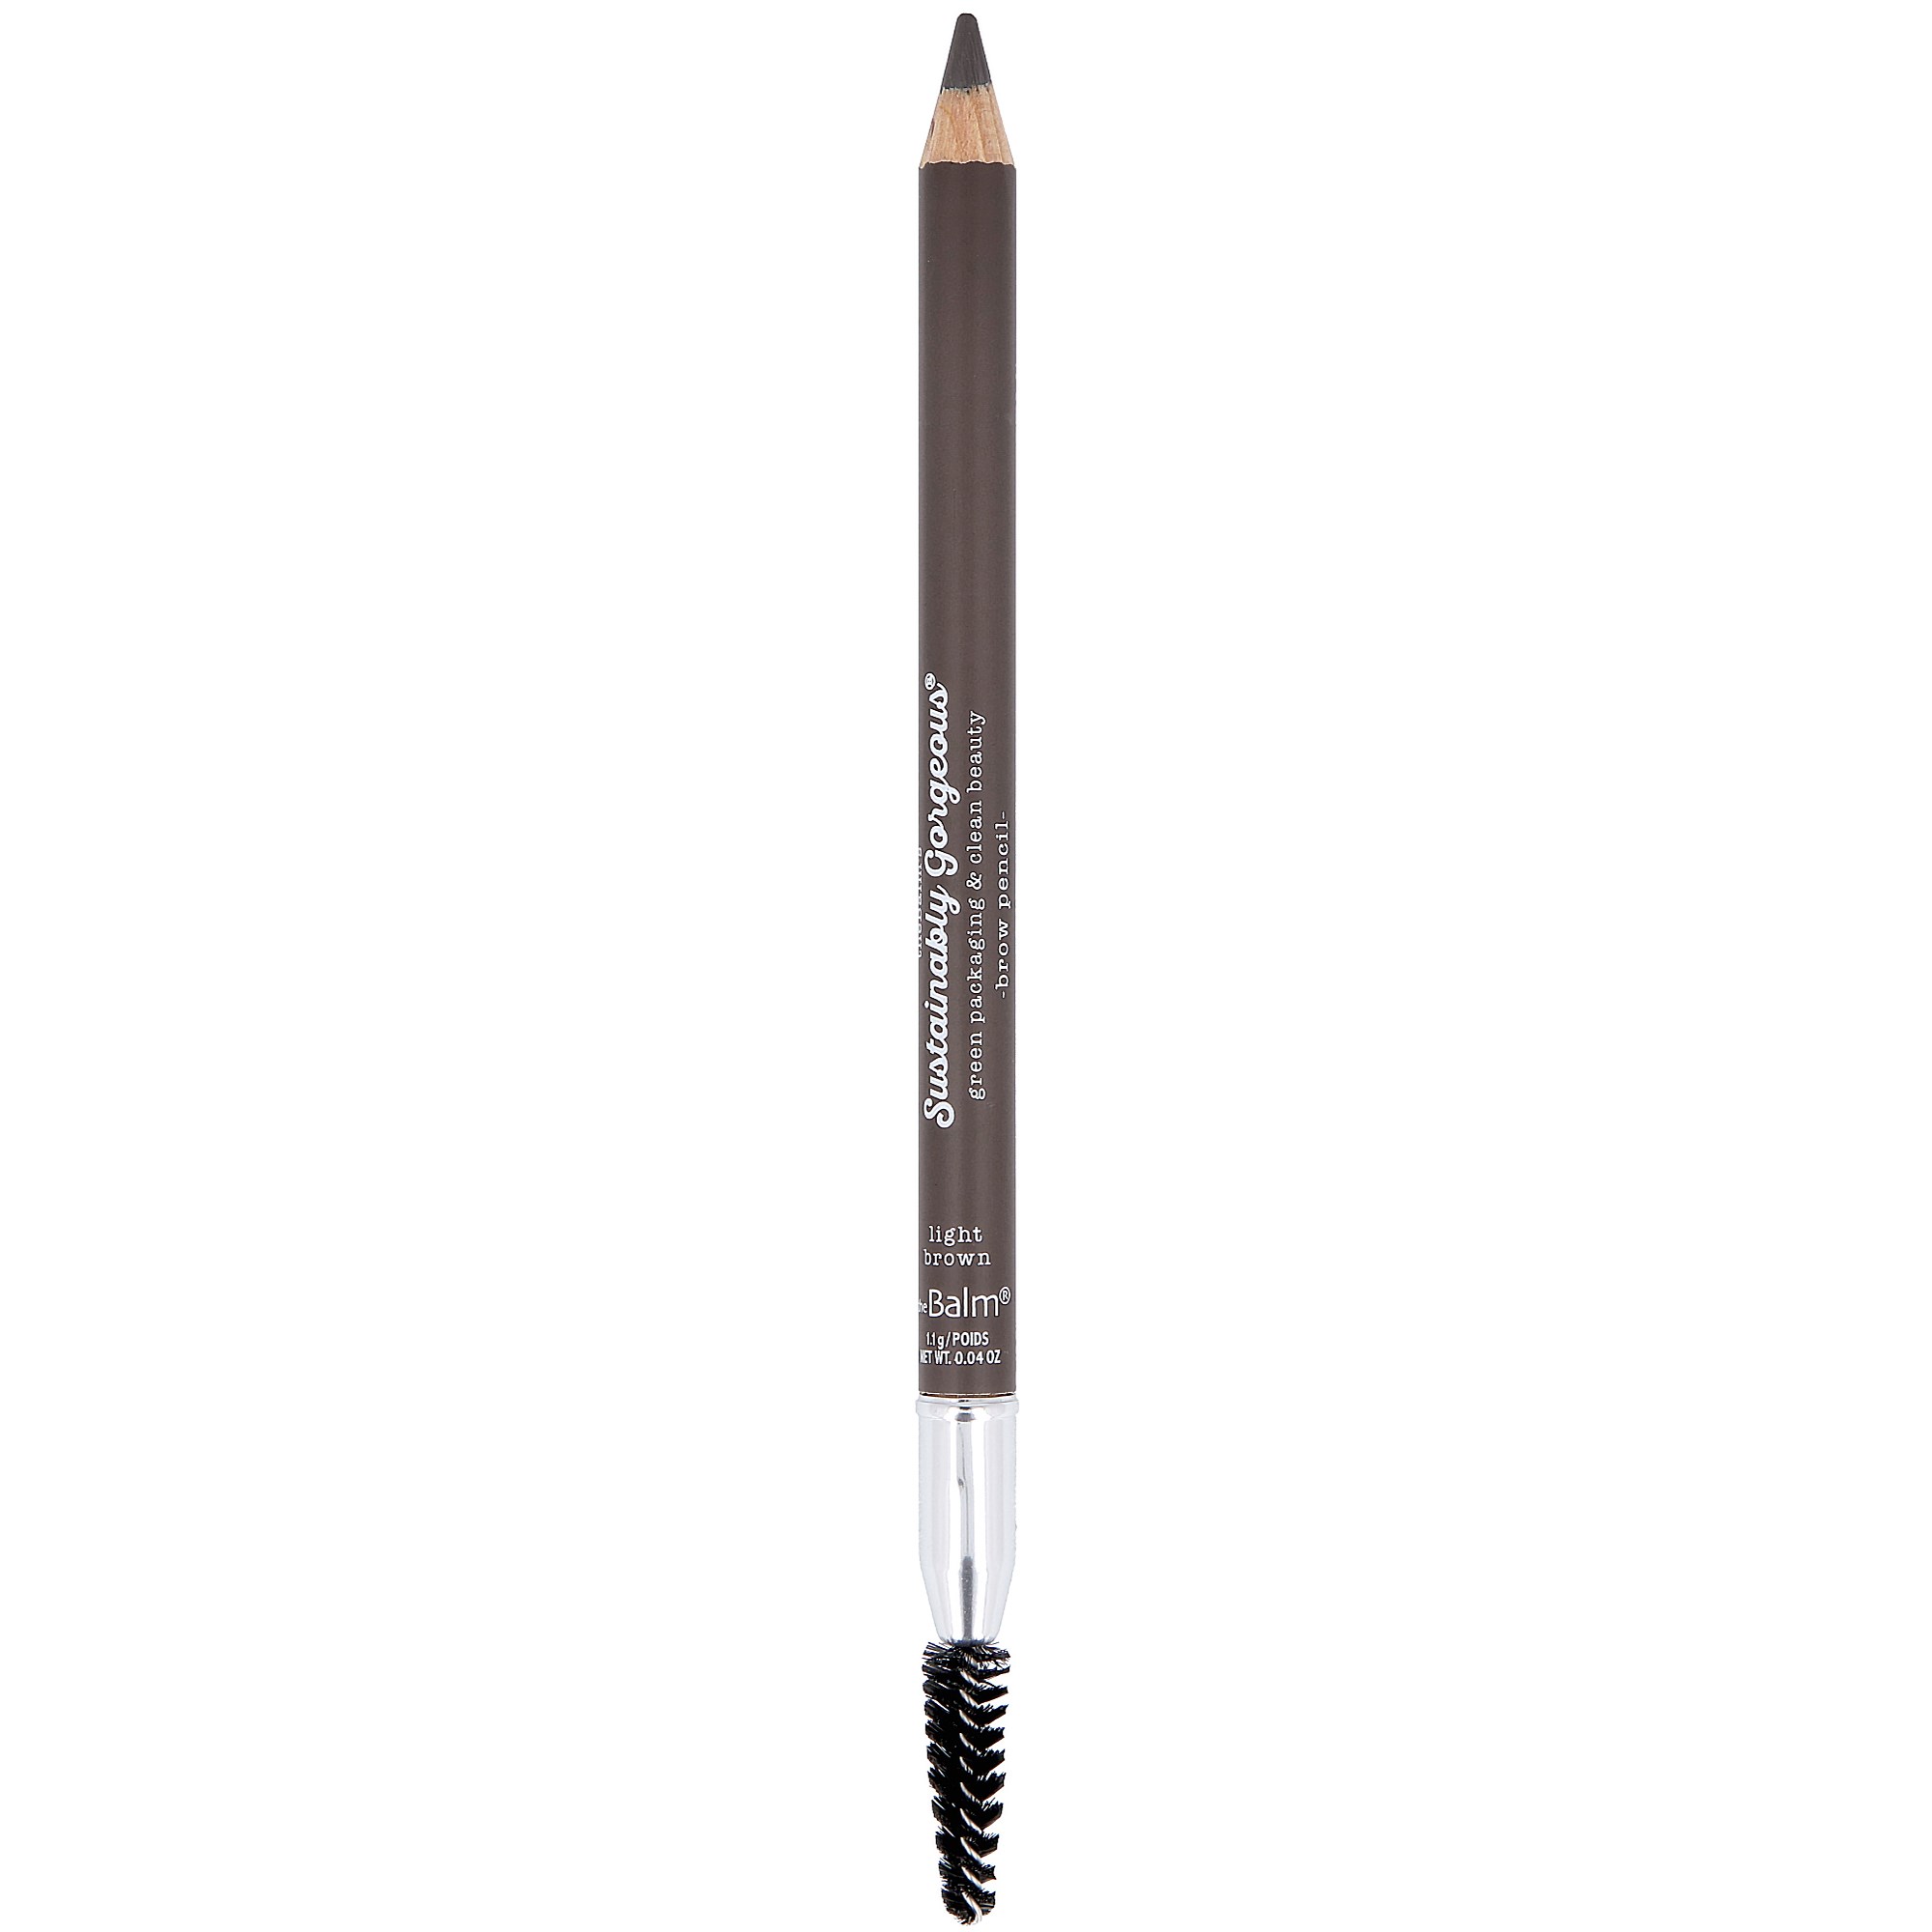 Läs mer om the Balm Sustainably Gorgeous Brow Pencil Light Brown